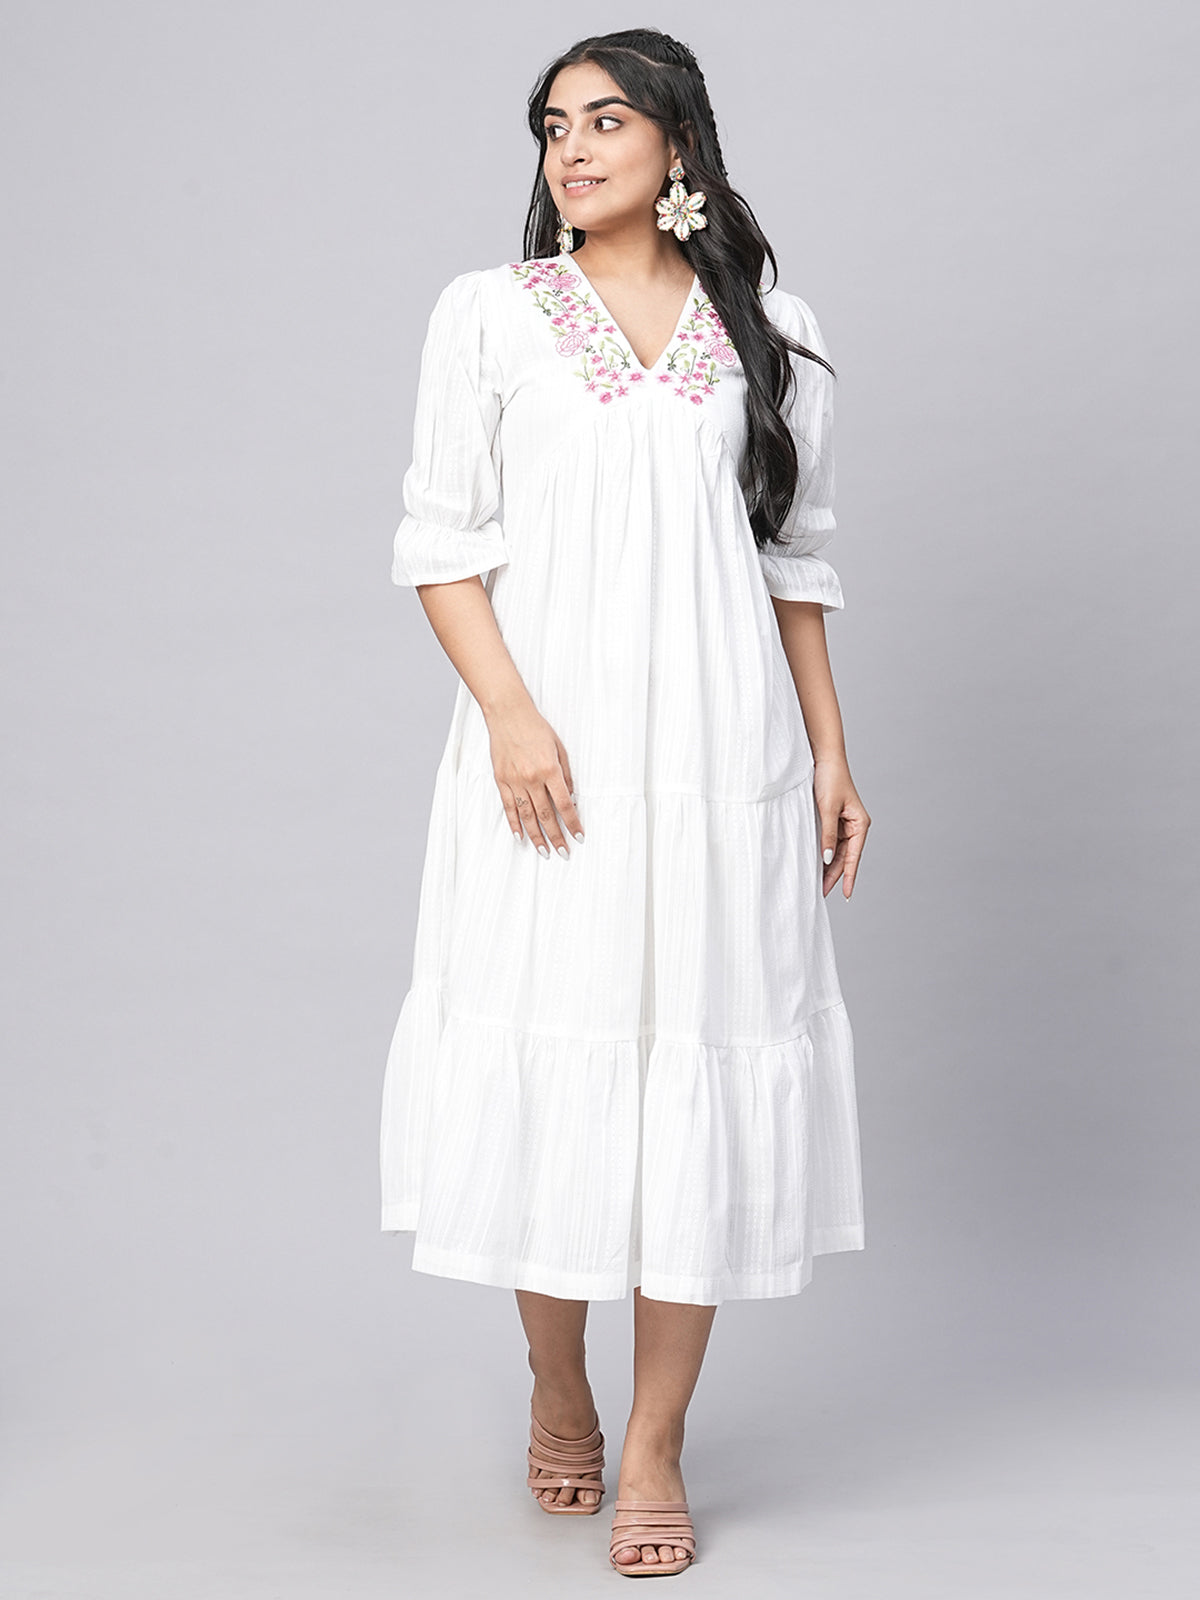 Odette White Cotton Embroidered Fit and Flared Stitched Indo Western Dress for Women